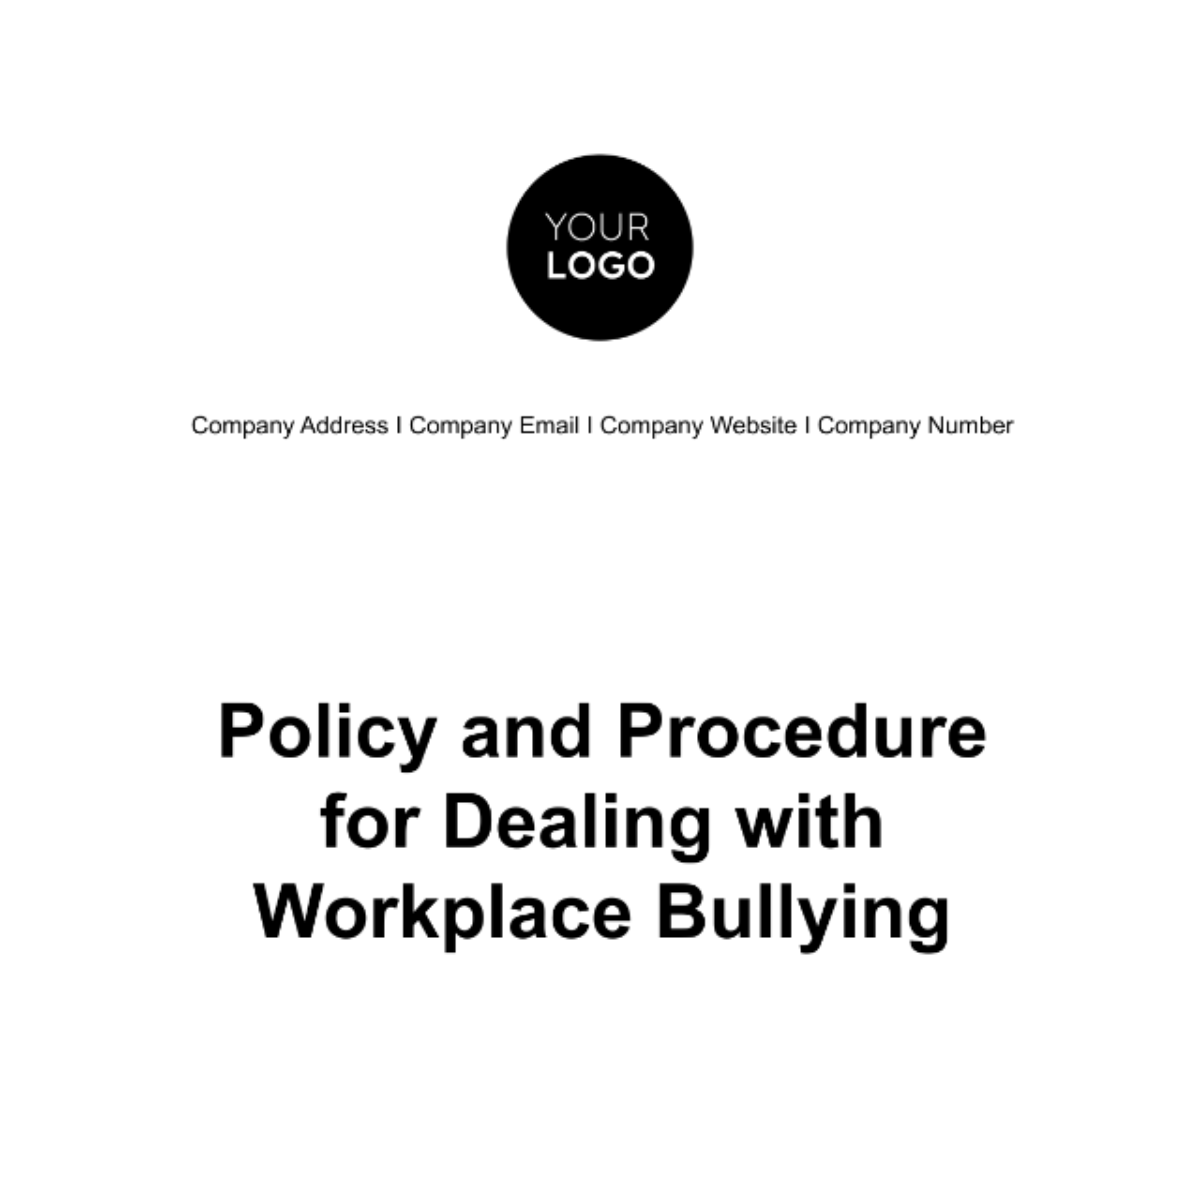 Free Policy and Procedure for Dealing with Workplace Bullying HR Template